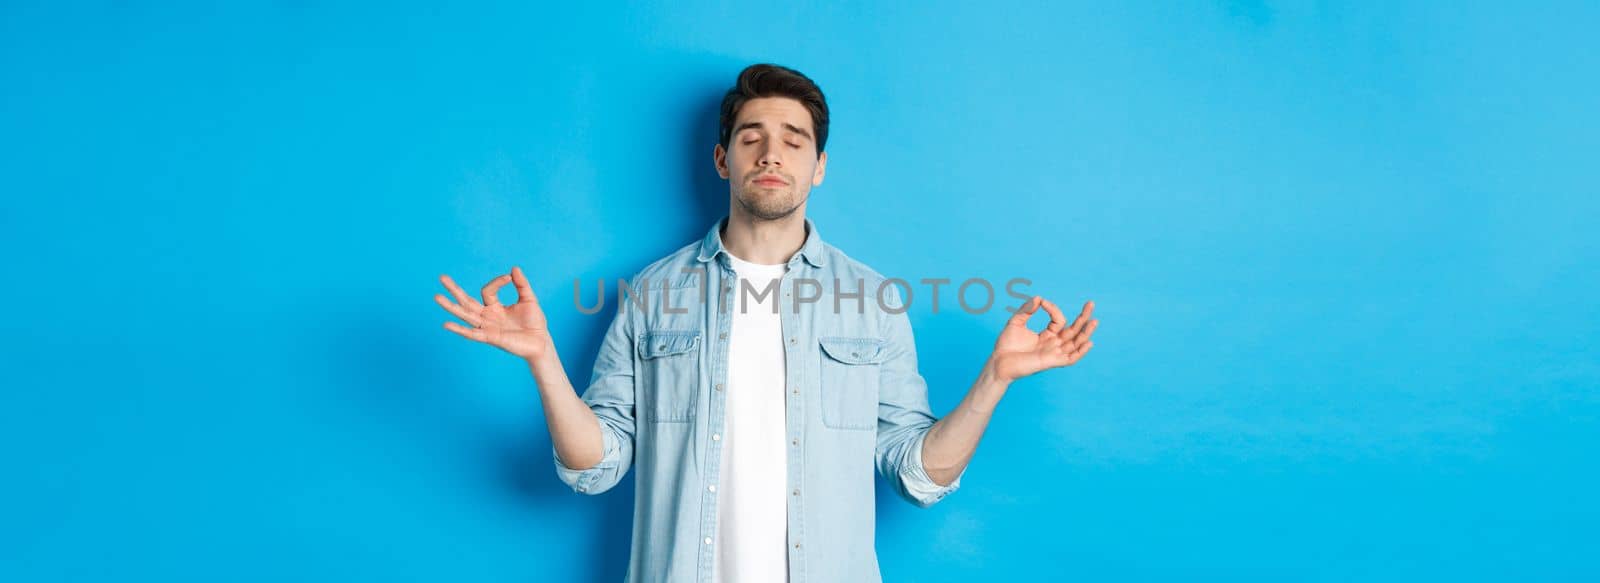 Calm man with closed eyes meditating, holding hands sideways and do yoga breathing exercises, standing against blue background.